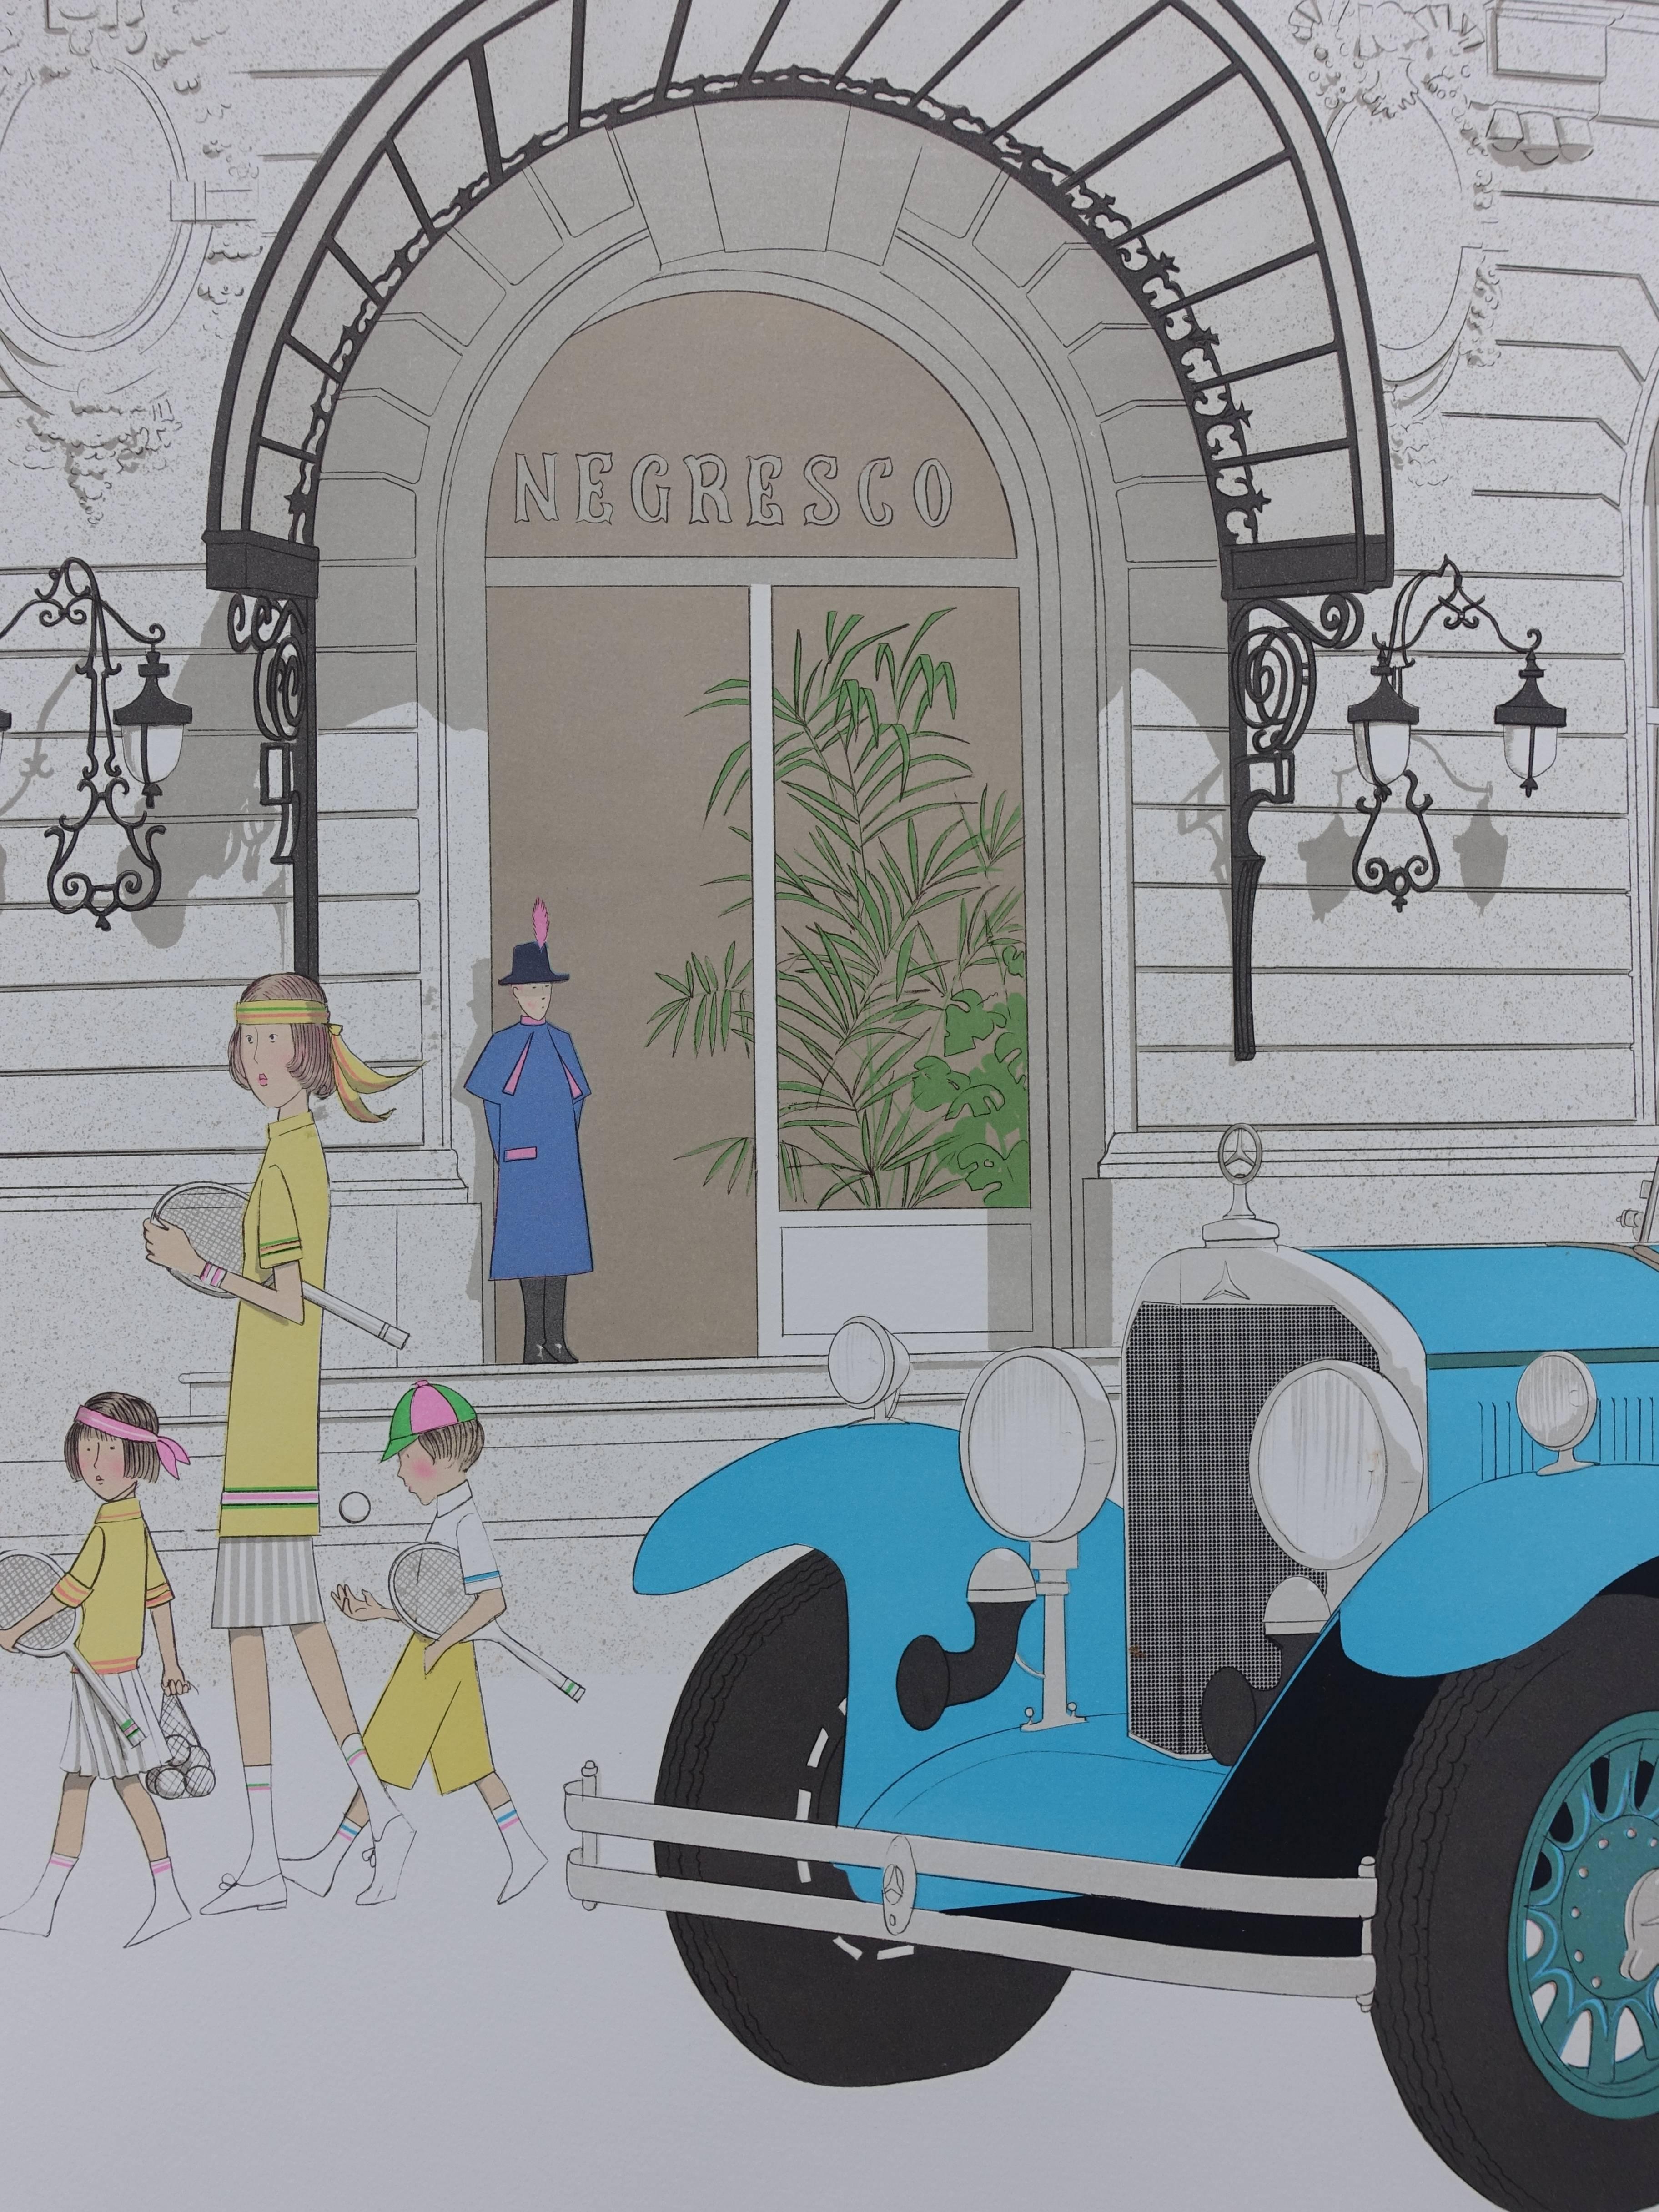 Hotel : Mercedes Cabriolet & Negresco (Nice) - Signed lithograph - 115ex - Modern Print by Denis Paul Noyer